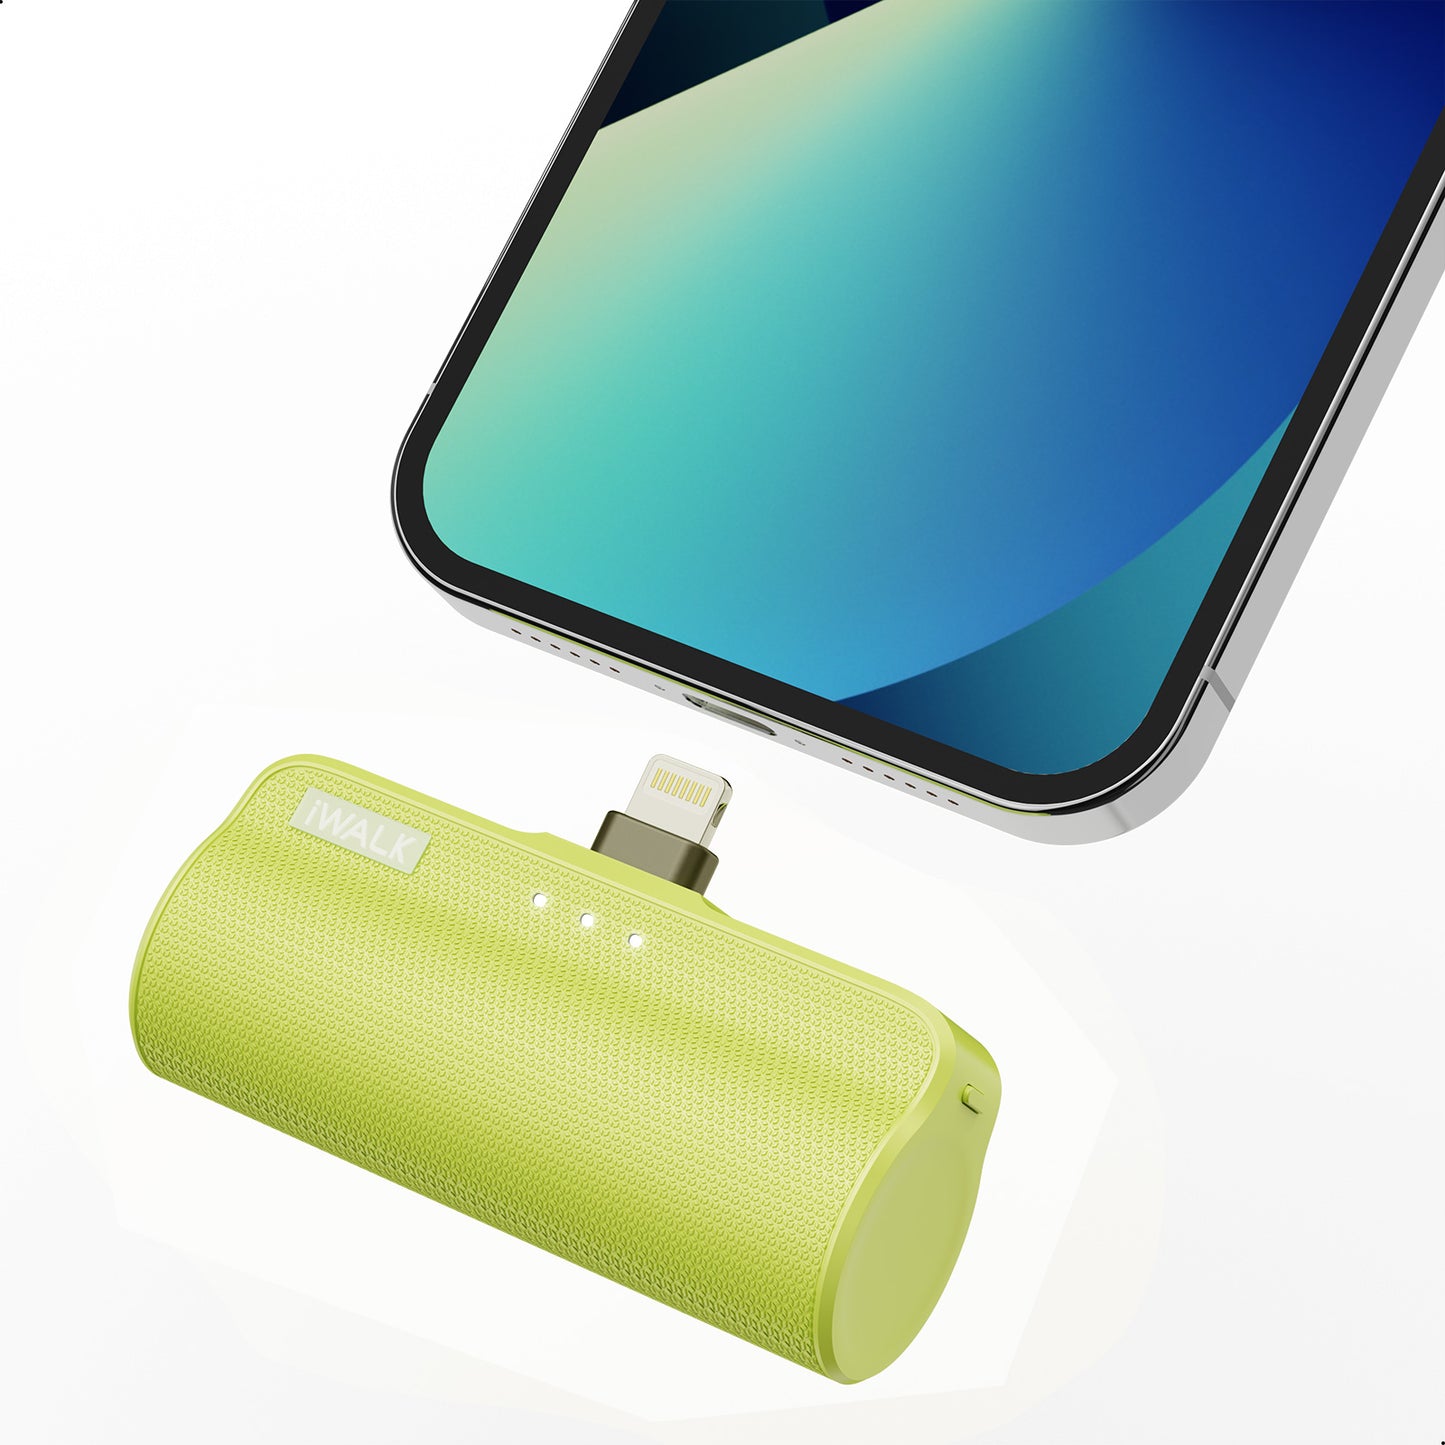 iWALK LinkPod Plus | 3350mAh Small Portable Charger [Built-In Lightning Connector]